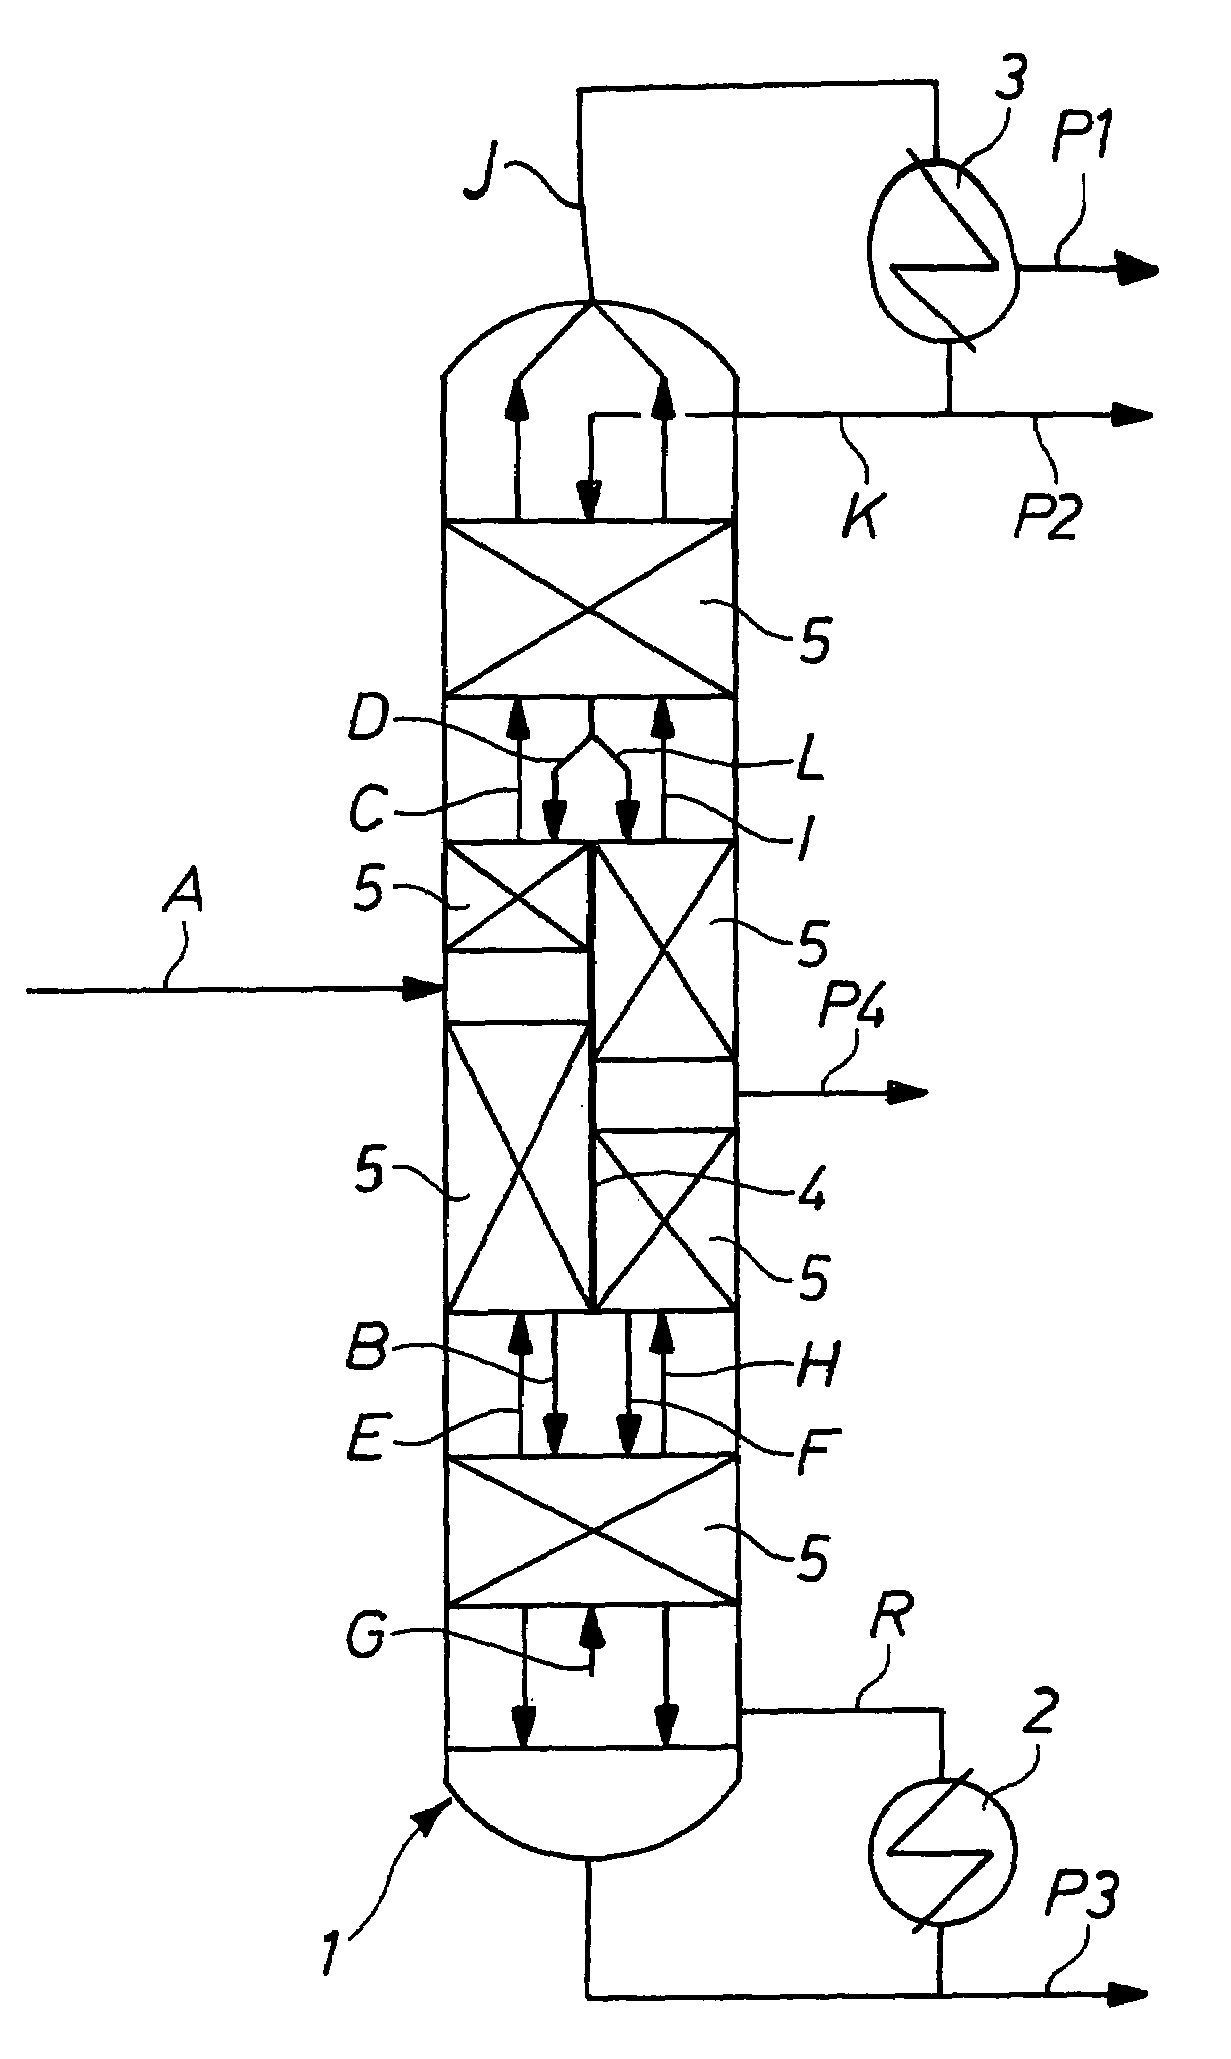 Process for the purification of toluene diisocyanate incorporating a dividing-wall distillation column for the final purification